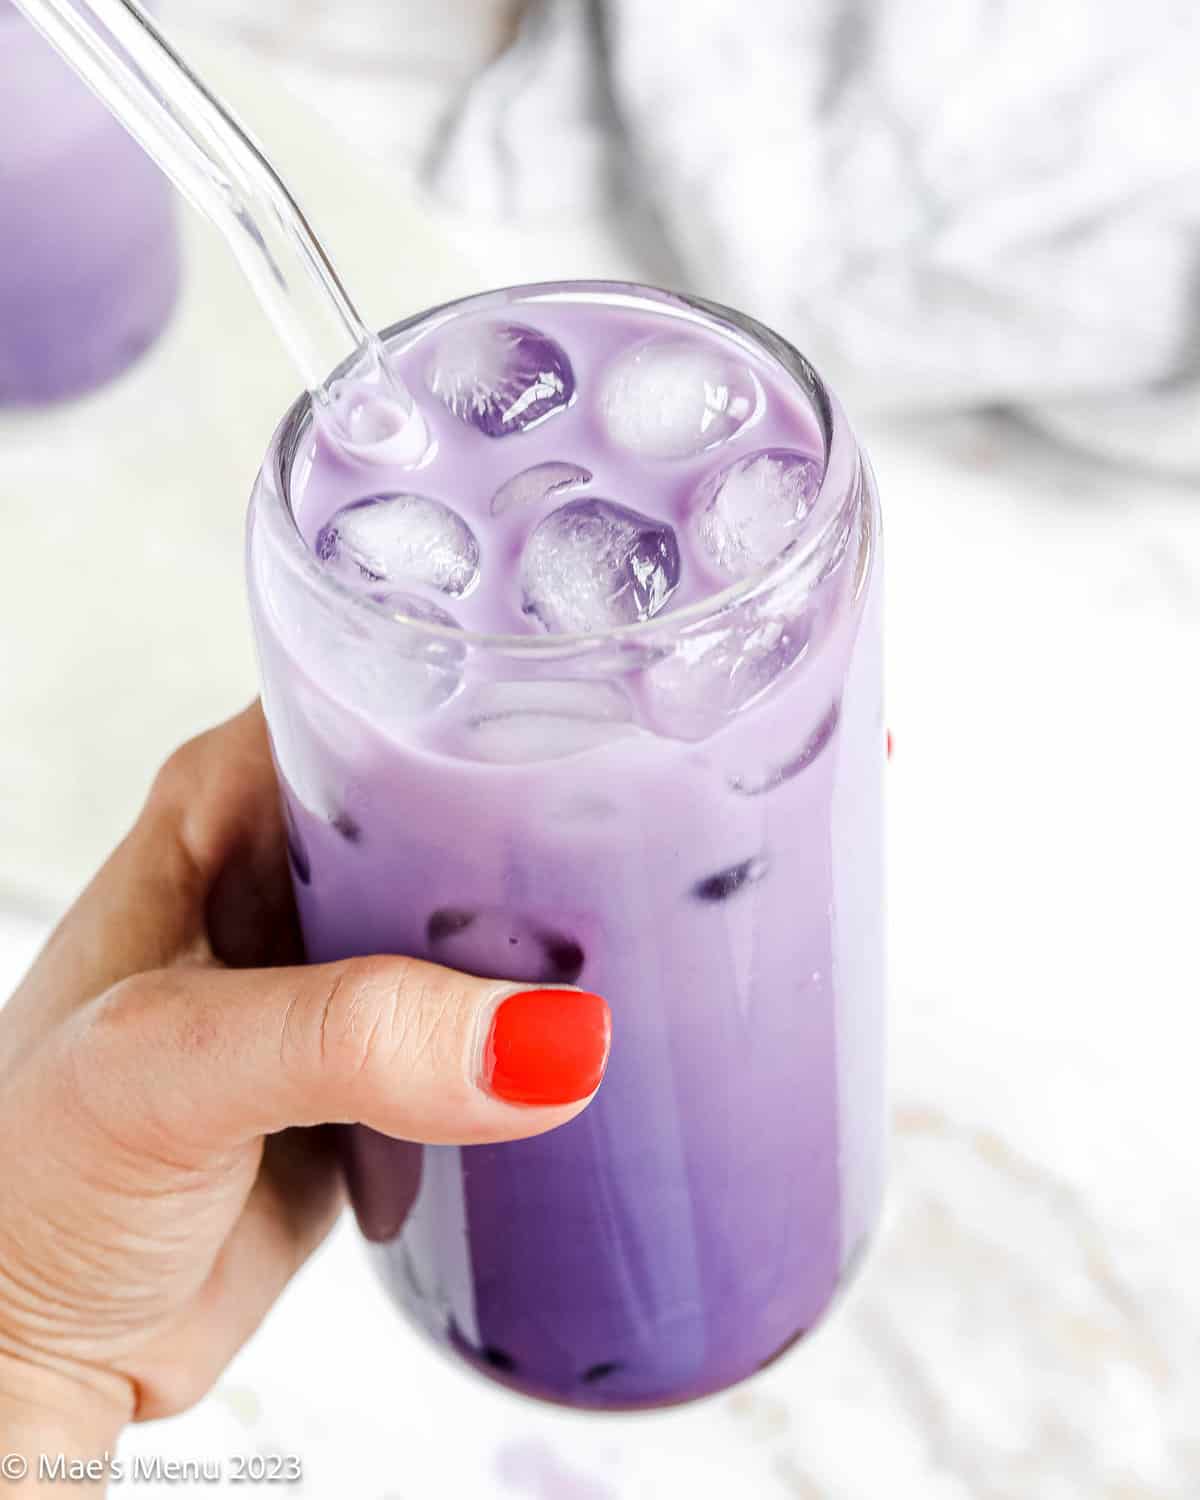 A shot of a hand holding a glass of ube boba.